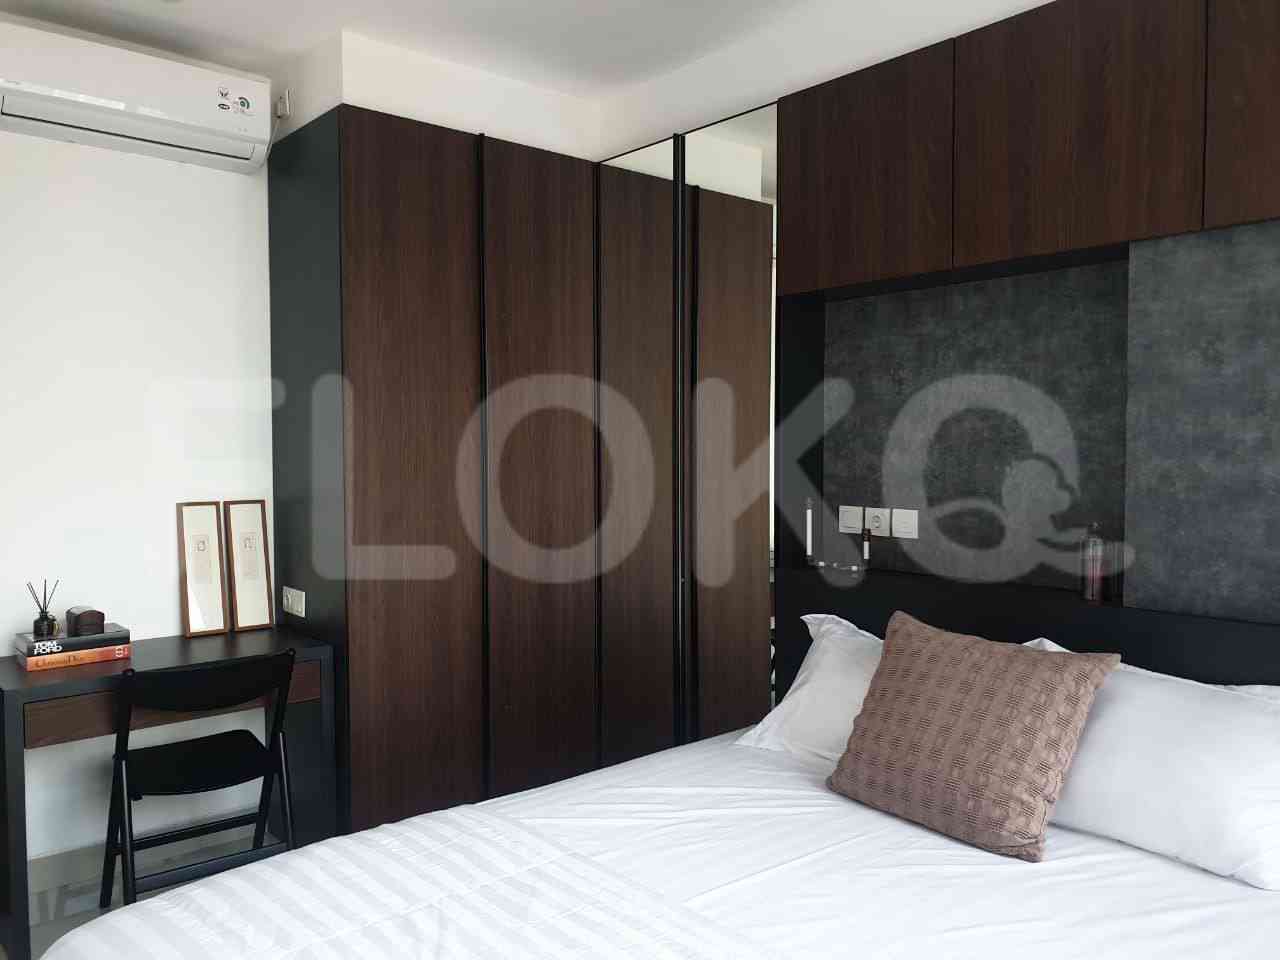 1 Bedroom on 16th Floor for Rent in Ciputra World 2 Apartment - fkue89 1